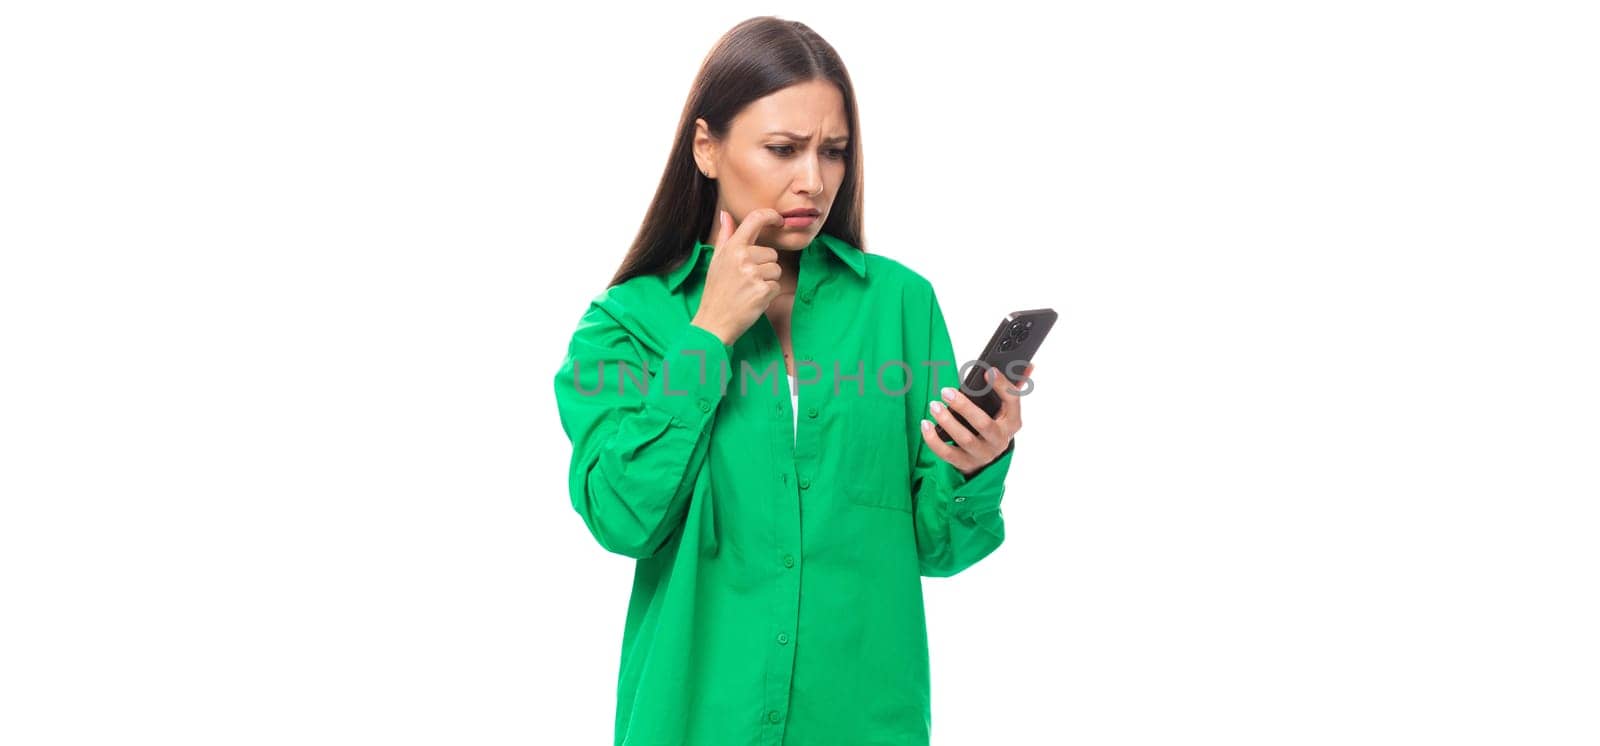 young caucasian brunette lady with makeup dressed in a green shirt and jeans is typing a message on the phone on a white background with copy space.